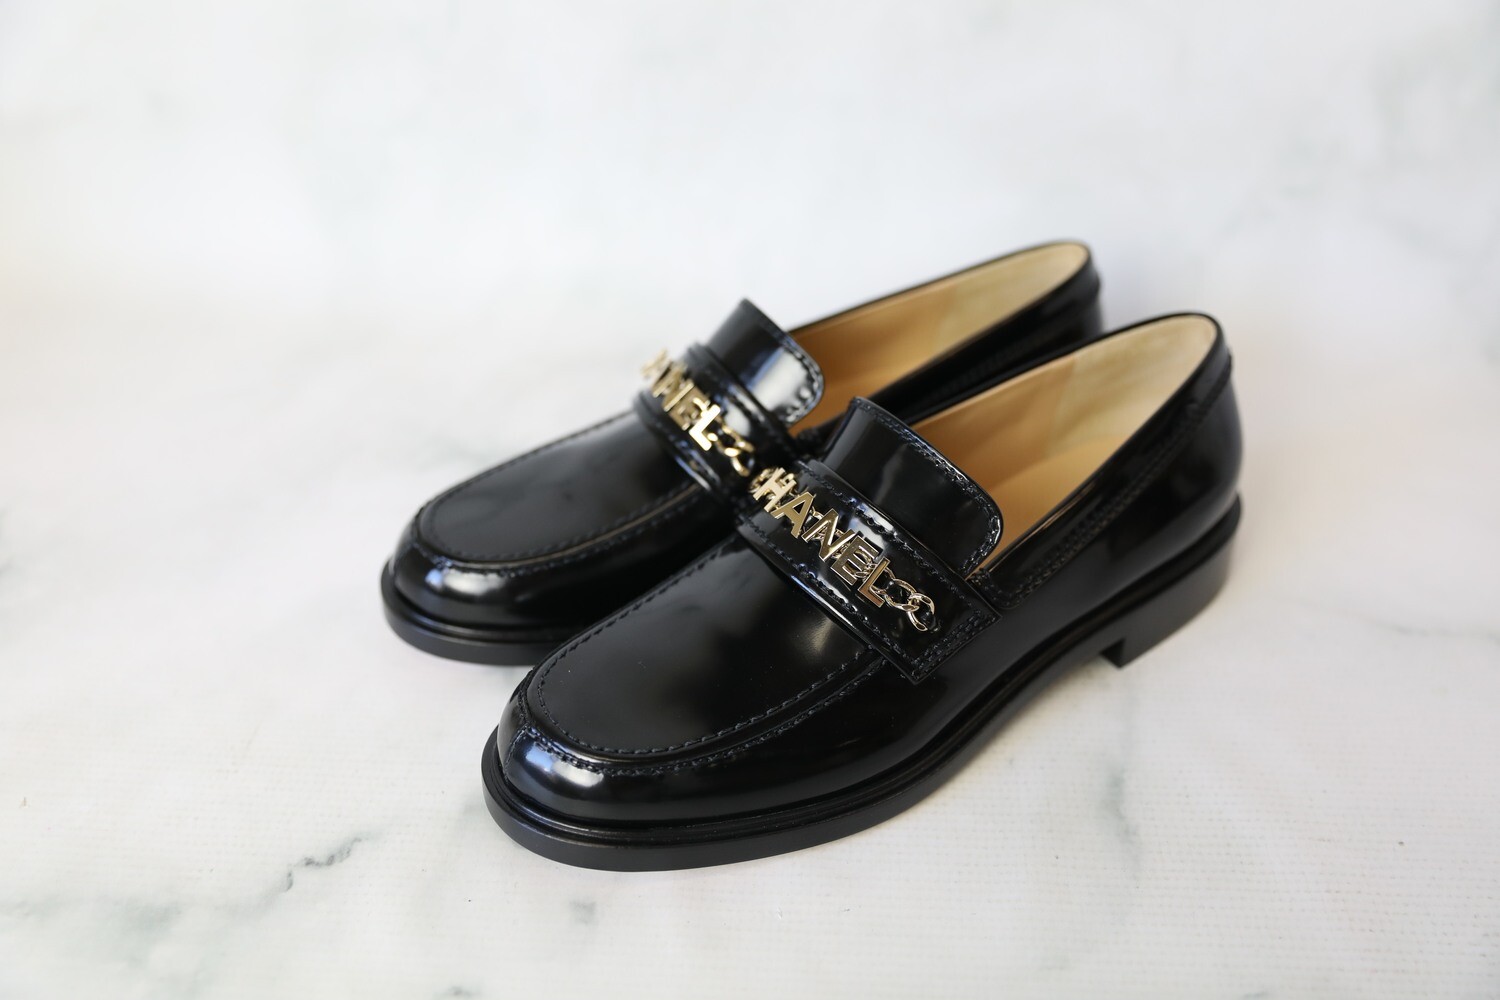 Chanel Loafers, Black Patent, Size 41, New in Box WA001